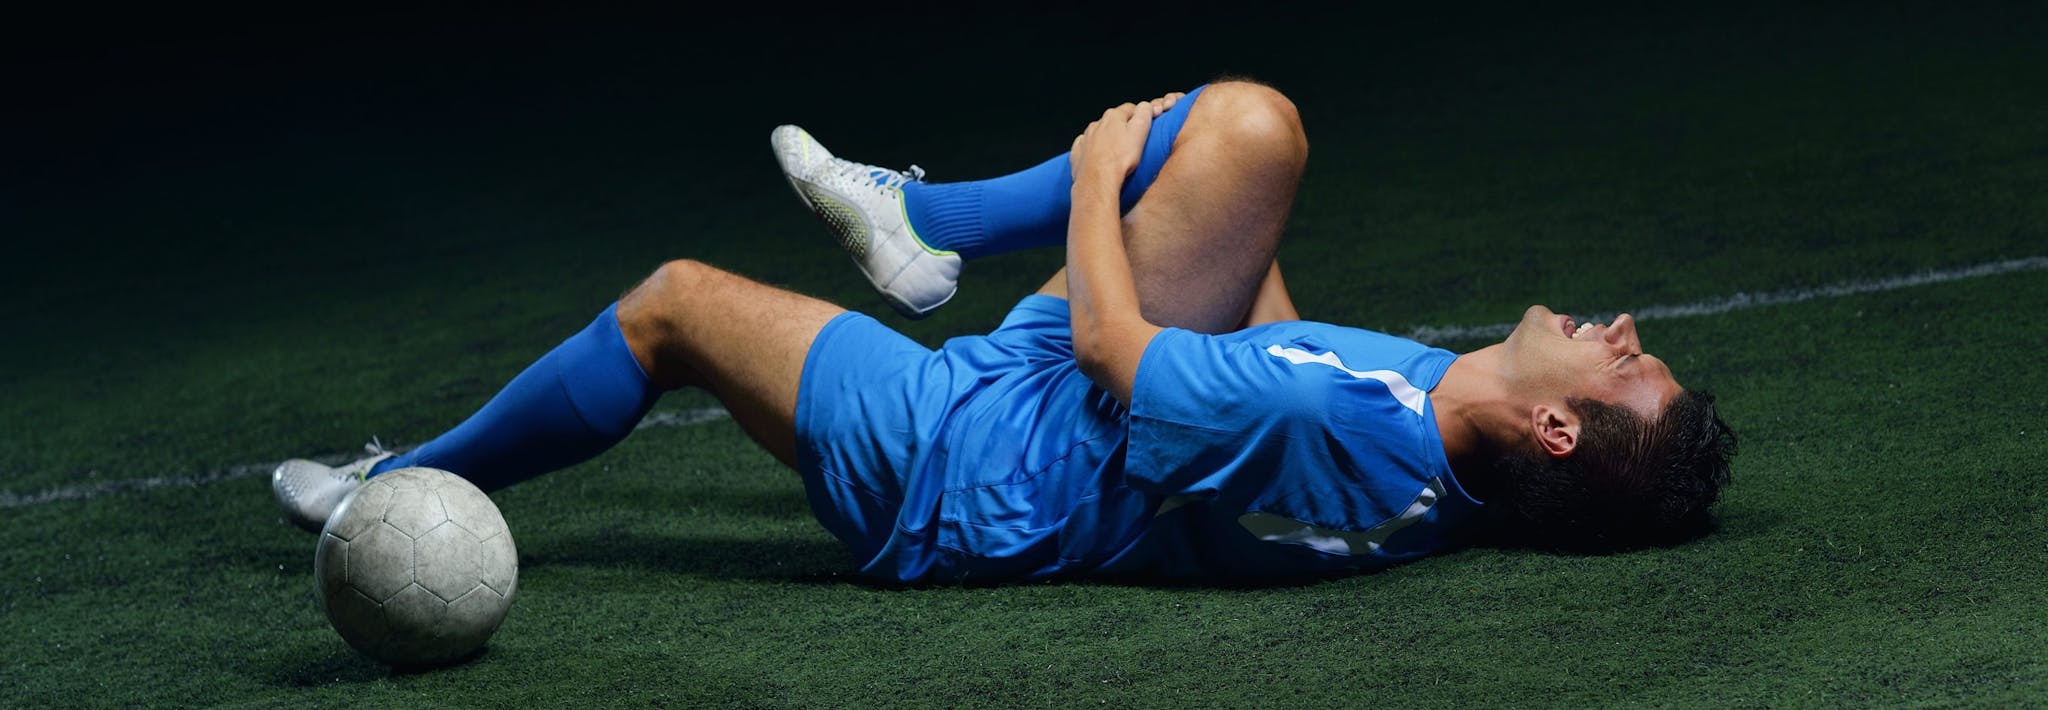 4 common sport injuries